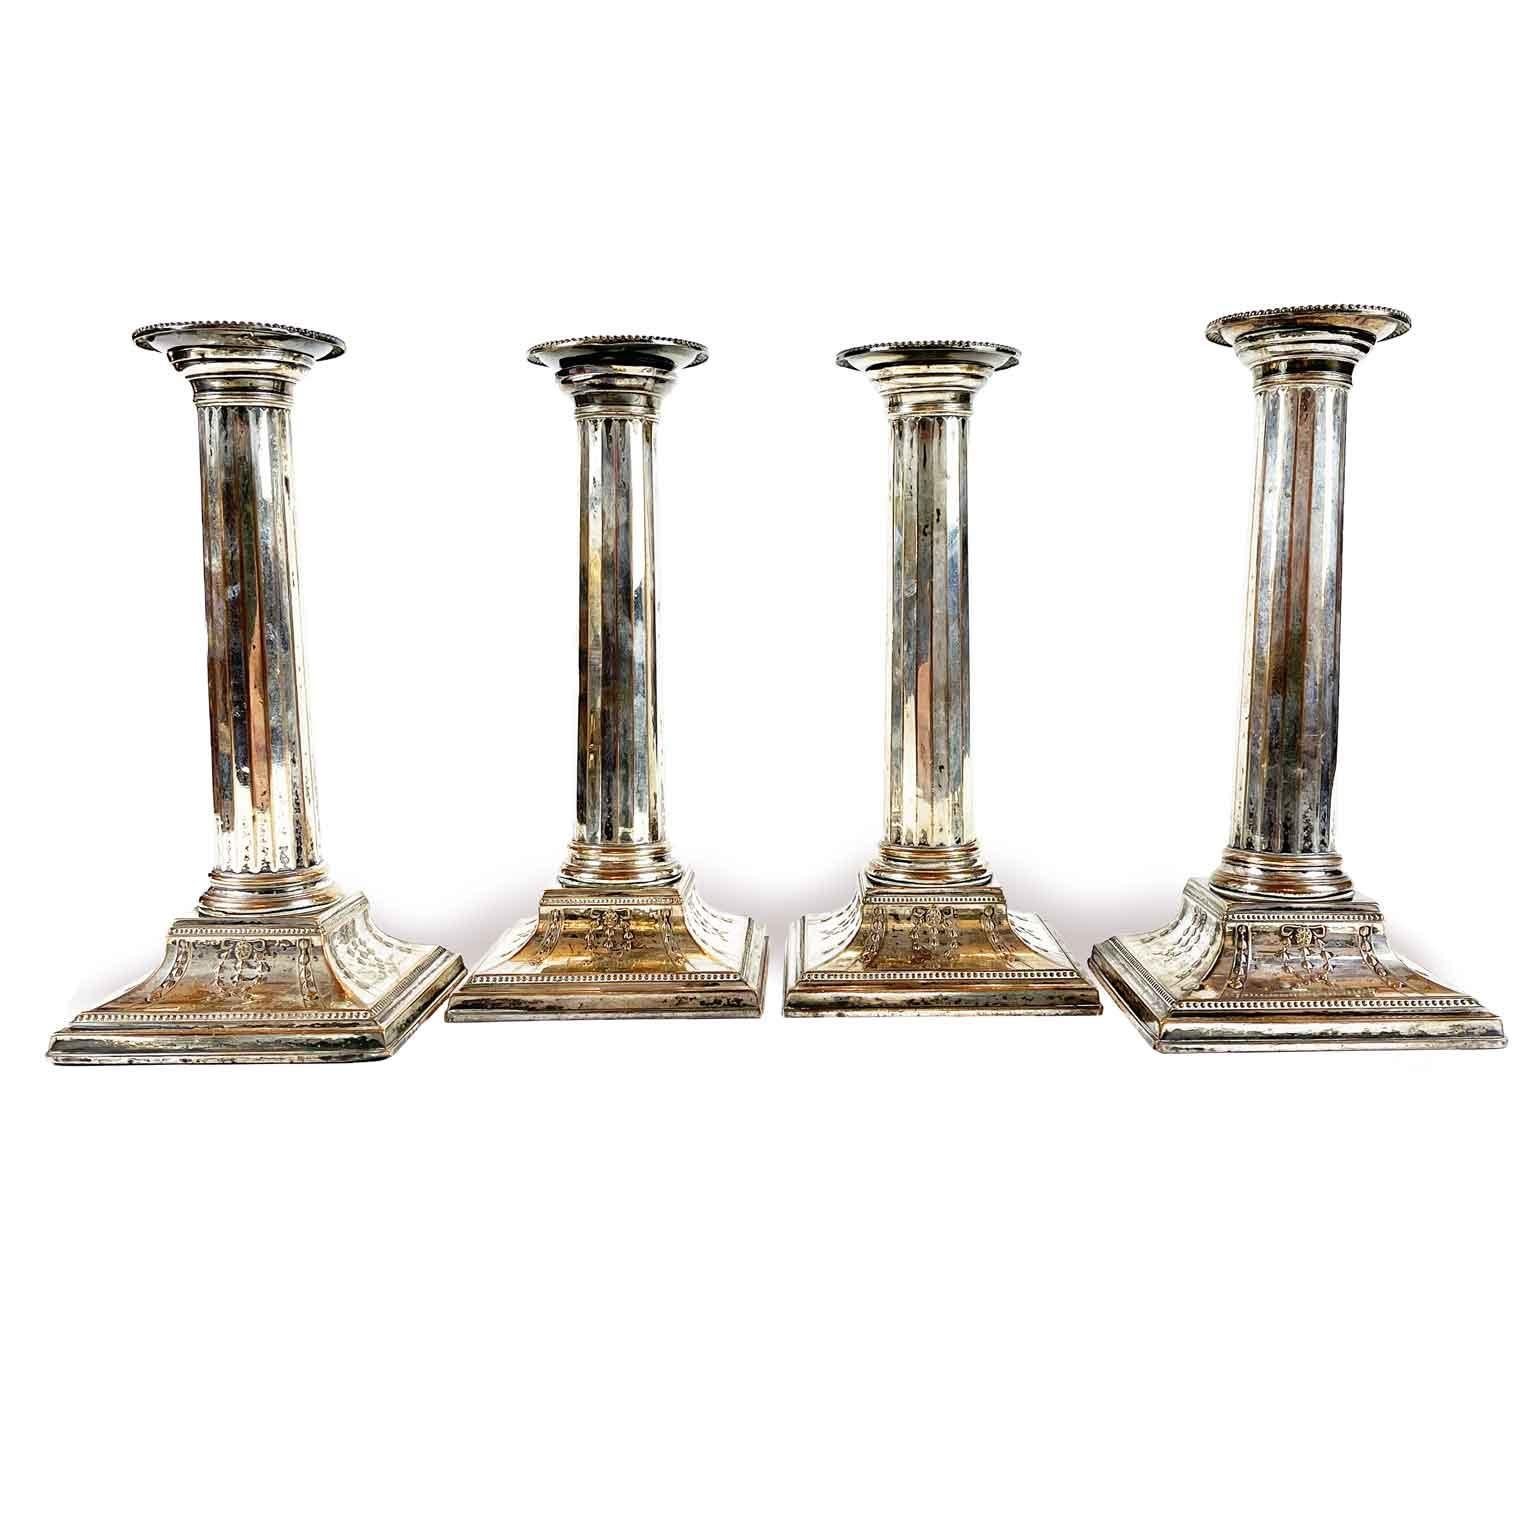 Set of four Neoclassical style Italian silvered copper candleholders early 1900.

This fine set of table candleholders, could be electrified and becomes an elegant set of four table lamps. For their slim dimensions are perfect to be put on shelves